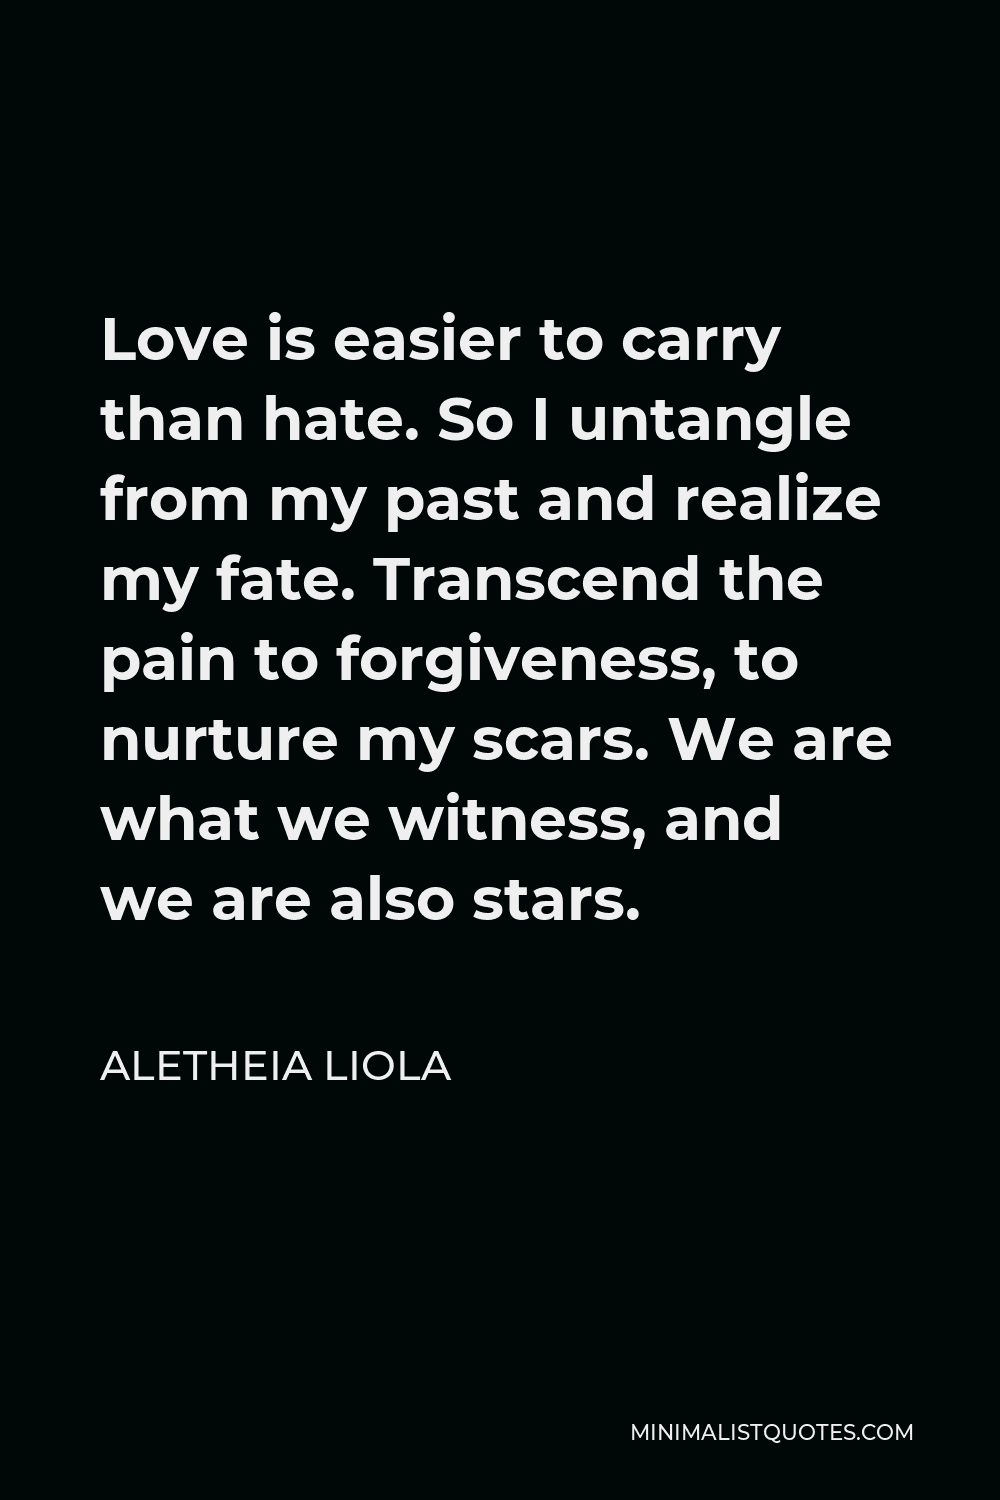 Aletheia Liola Quote - Love is easier to carry than hate. So I untangle from my past and realize my fate. Transcend the pain to forgiveness, to nurture my scars. We are what we witness, and we are also stars.